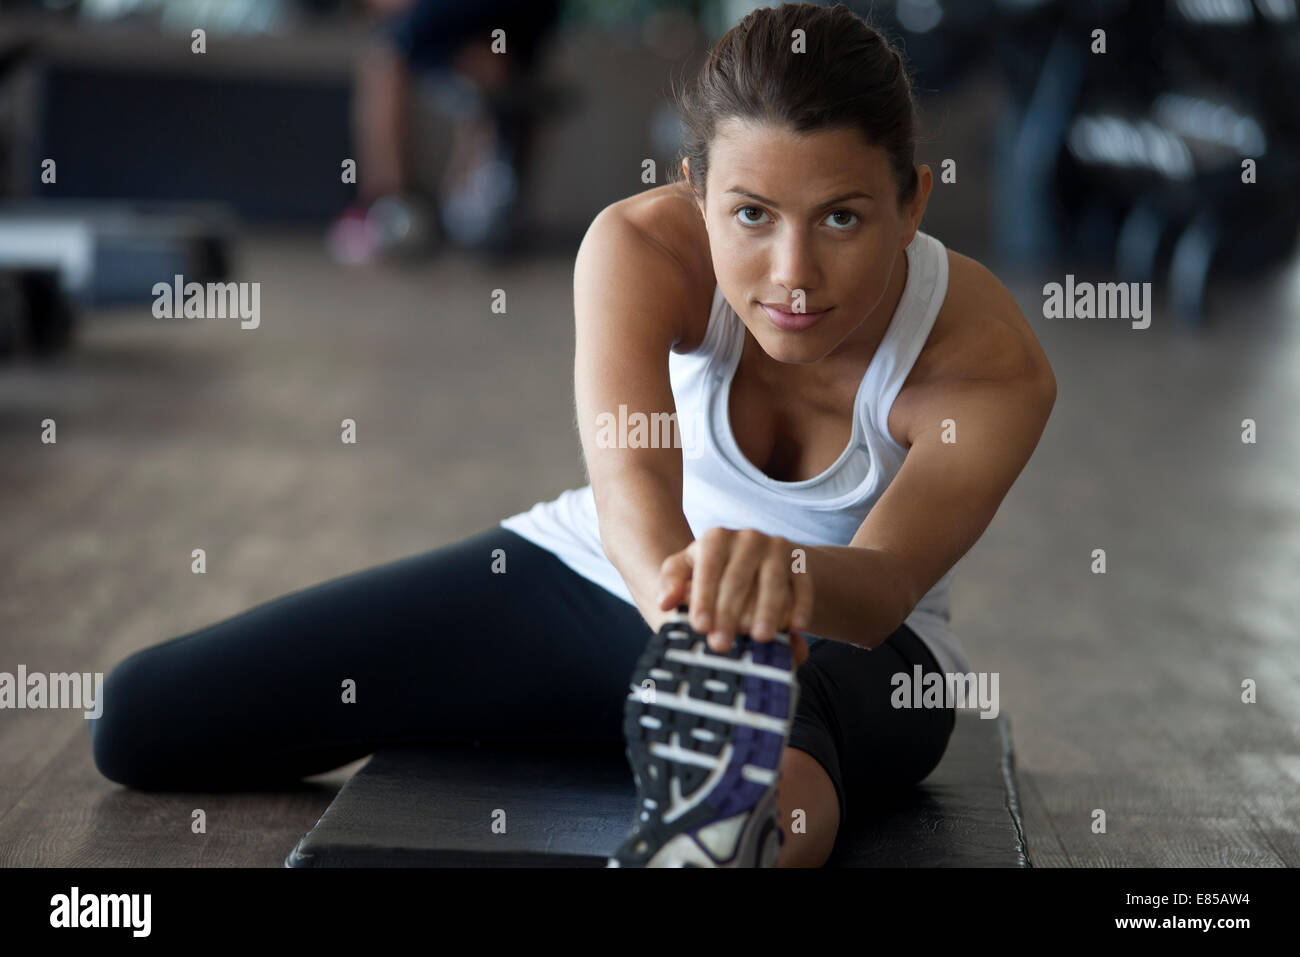 Woman at gym warming up with leg stretches Stock Photo